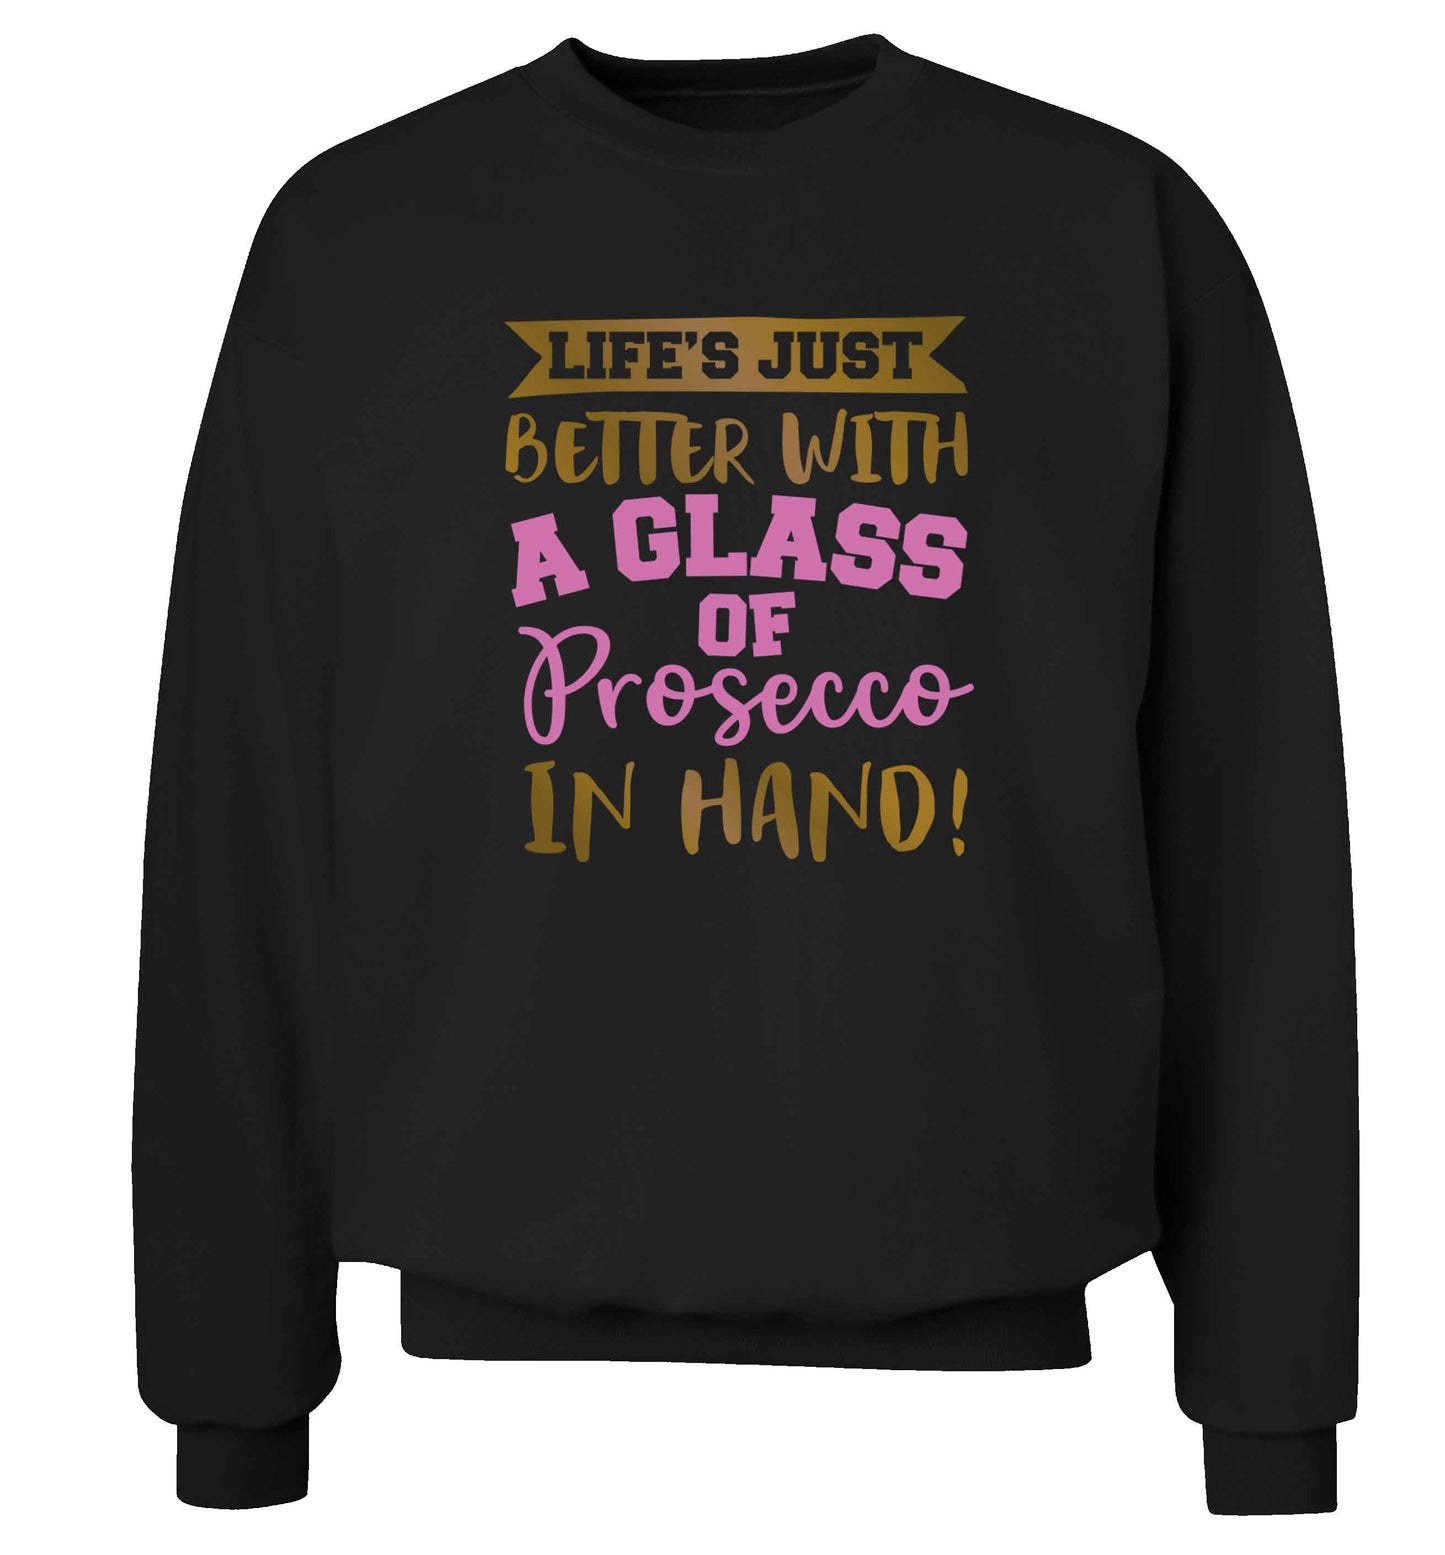 Life's just better with a glass of prosecco in hand Adult's unisex black Sweater 2XL